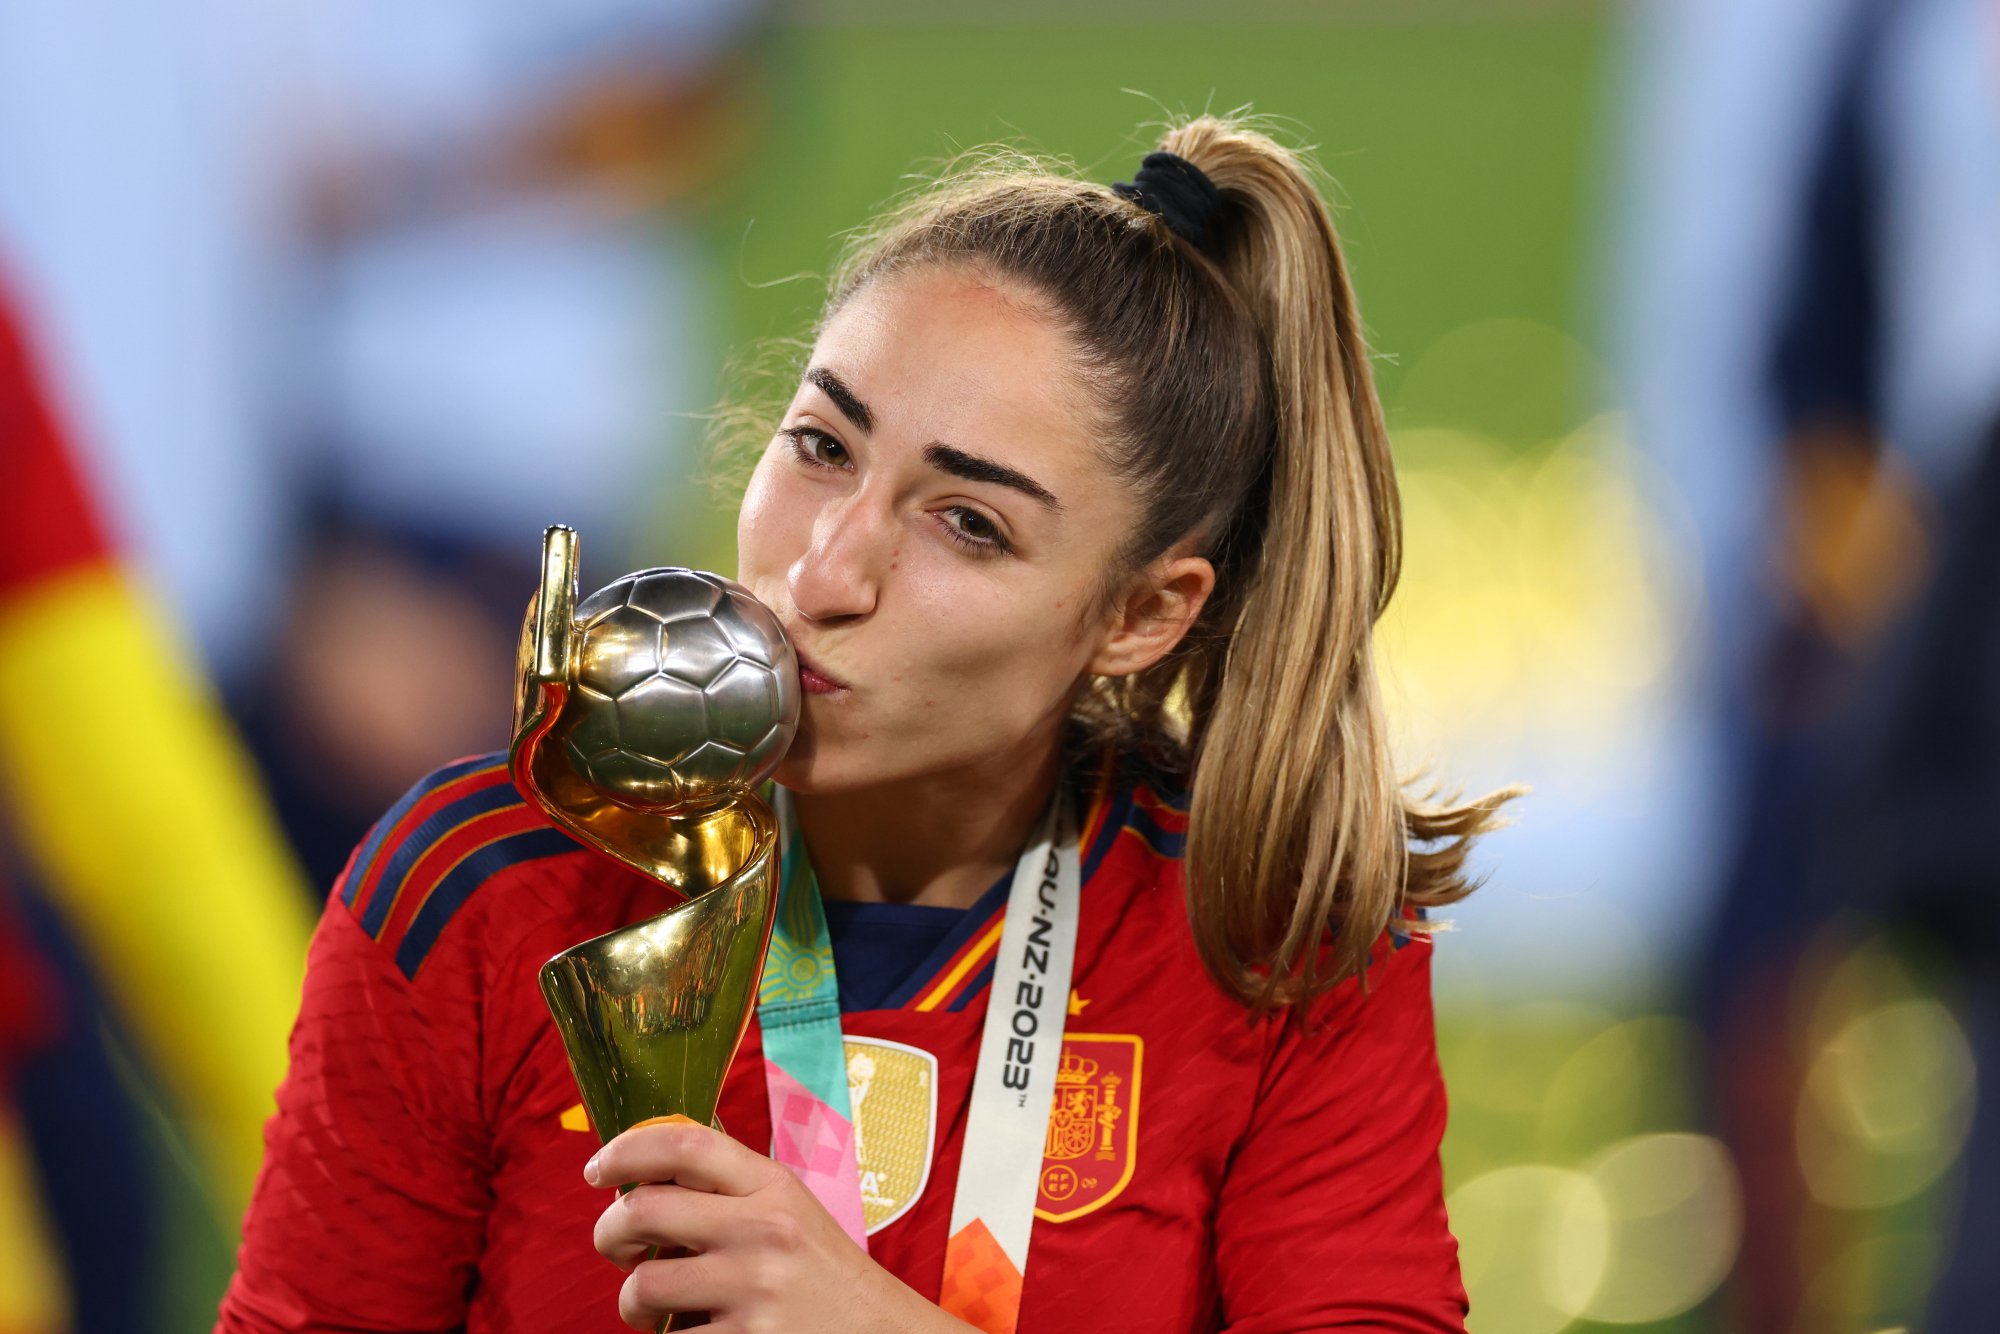 Carmona, in a high ponytail and red jersey, kisses the soccer ball atop the Women's World Cup trophy.